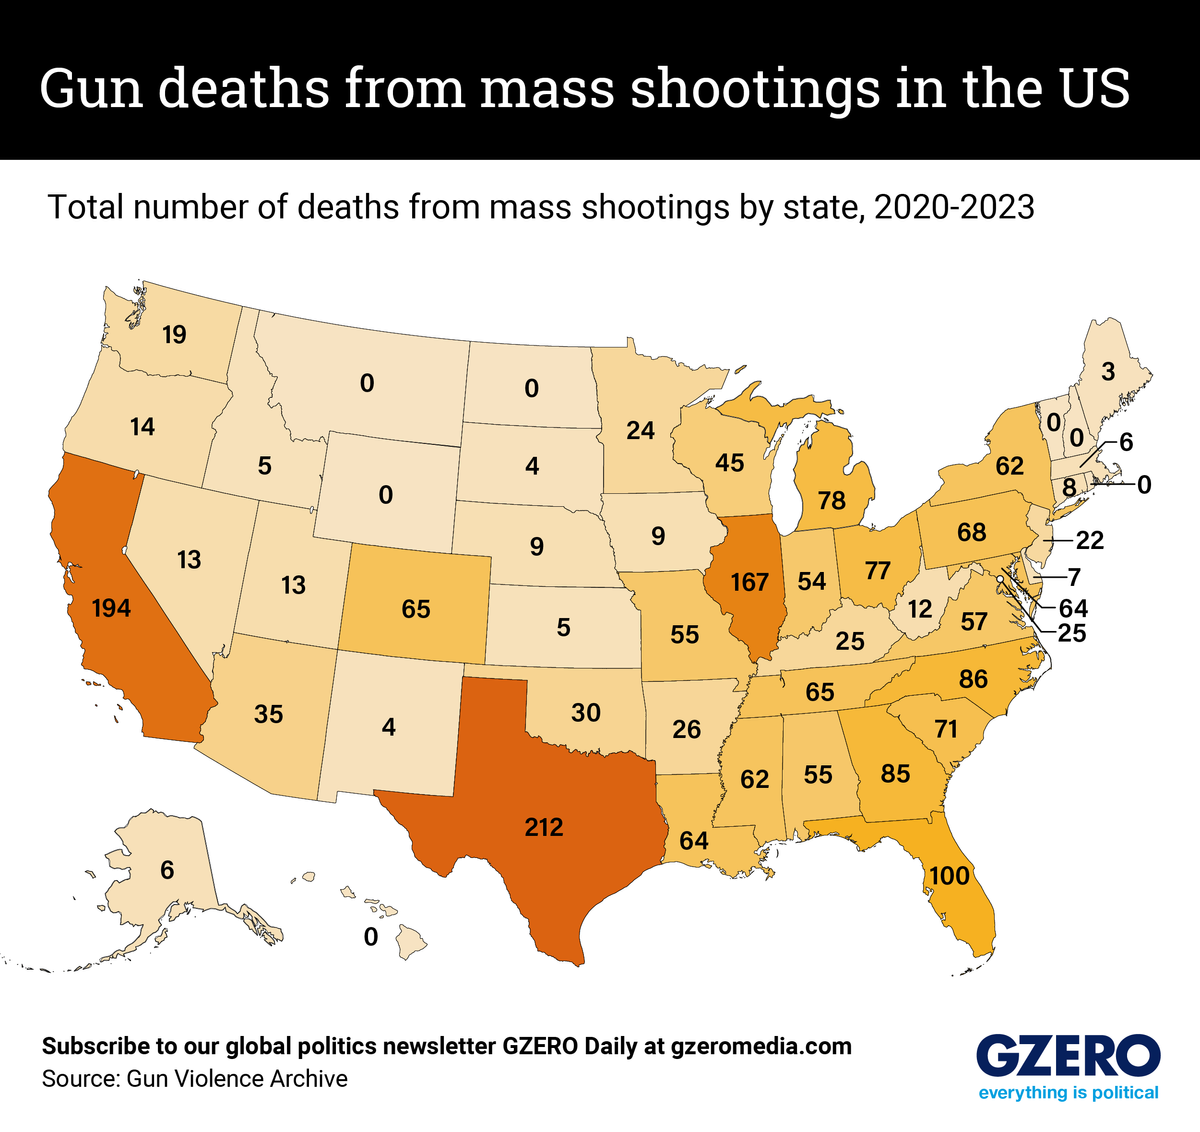 Map showing gun deaths by US state from 2020-2023.